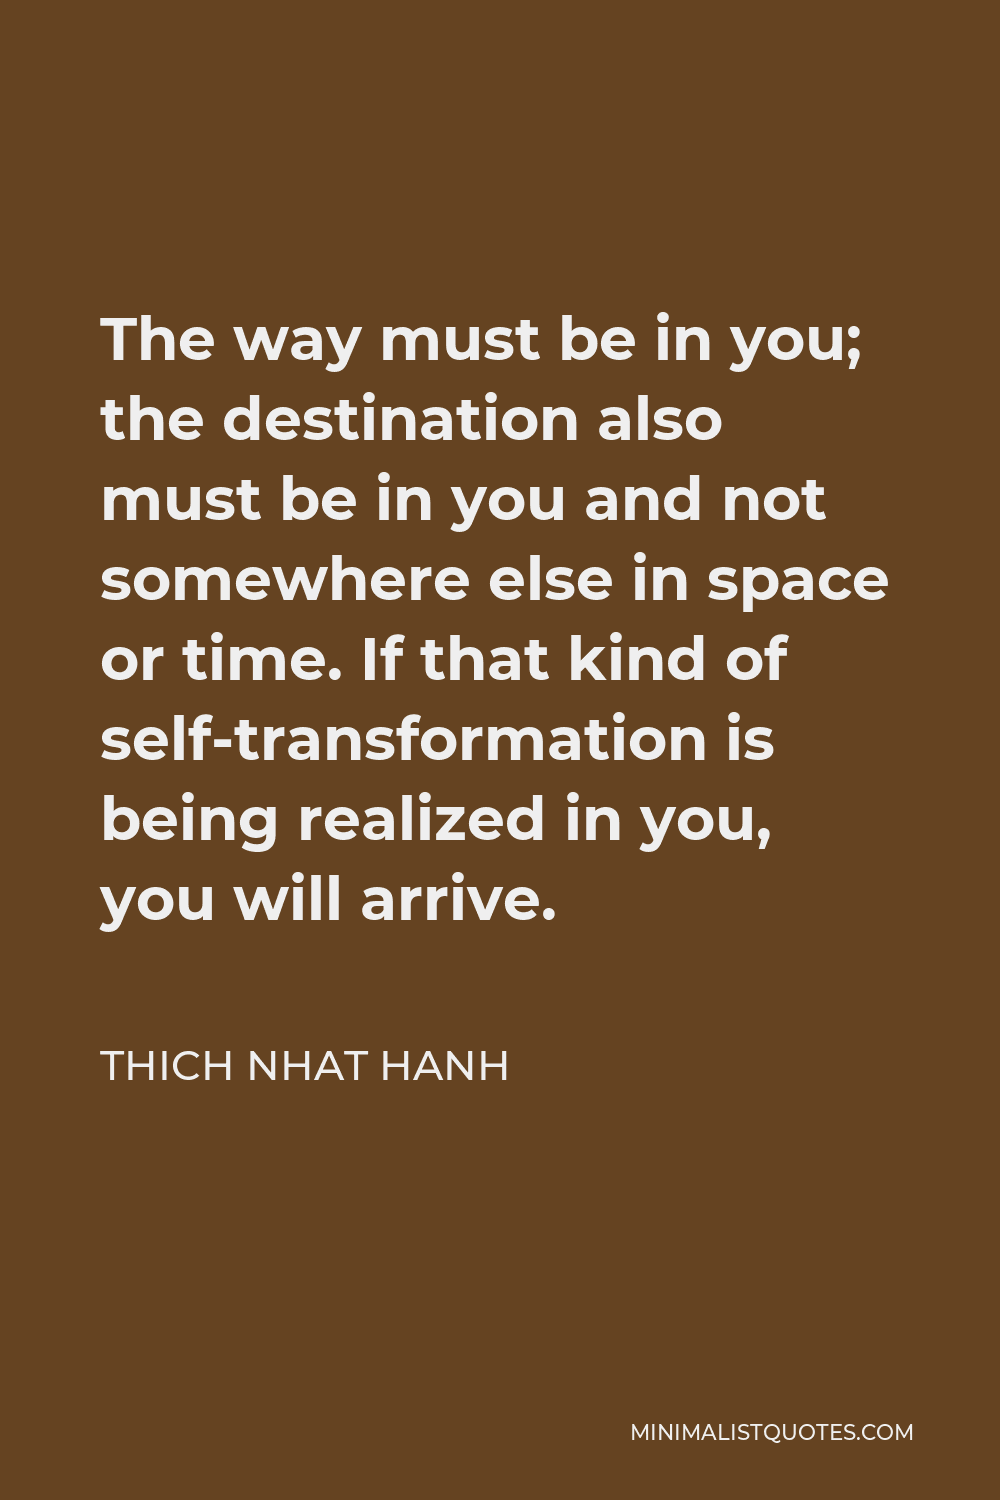 Thich Nhat Hanh Quote - The way must be in you; the destination also must be in you and not somewhere else in space or time. If that kind of self-transformation is being realized in you, you will arrive.